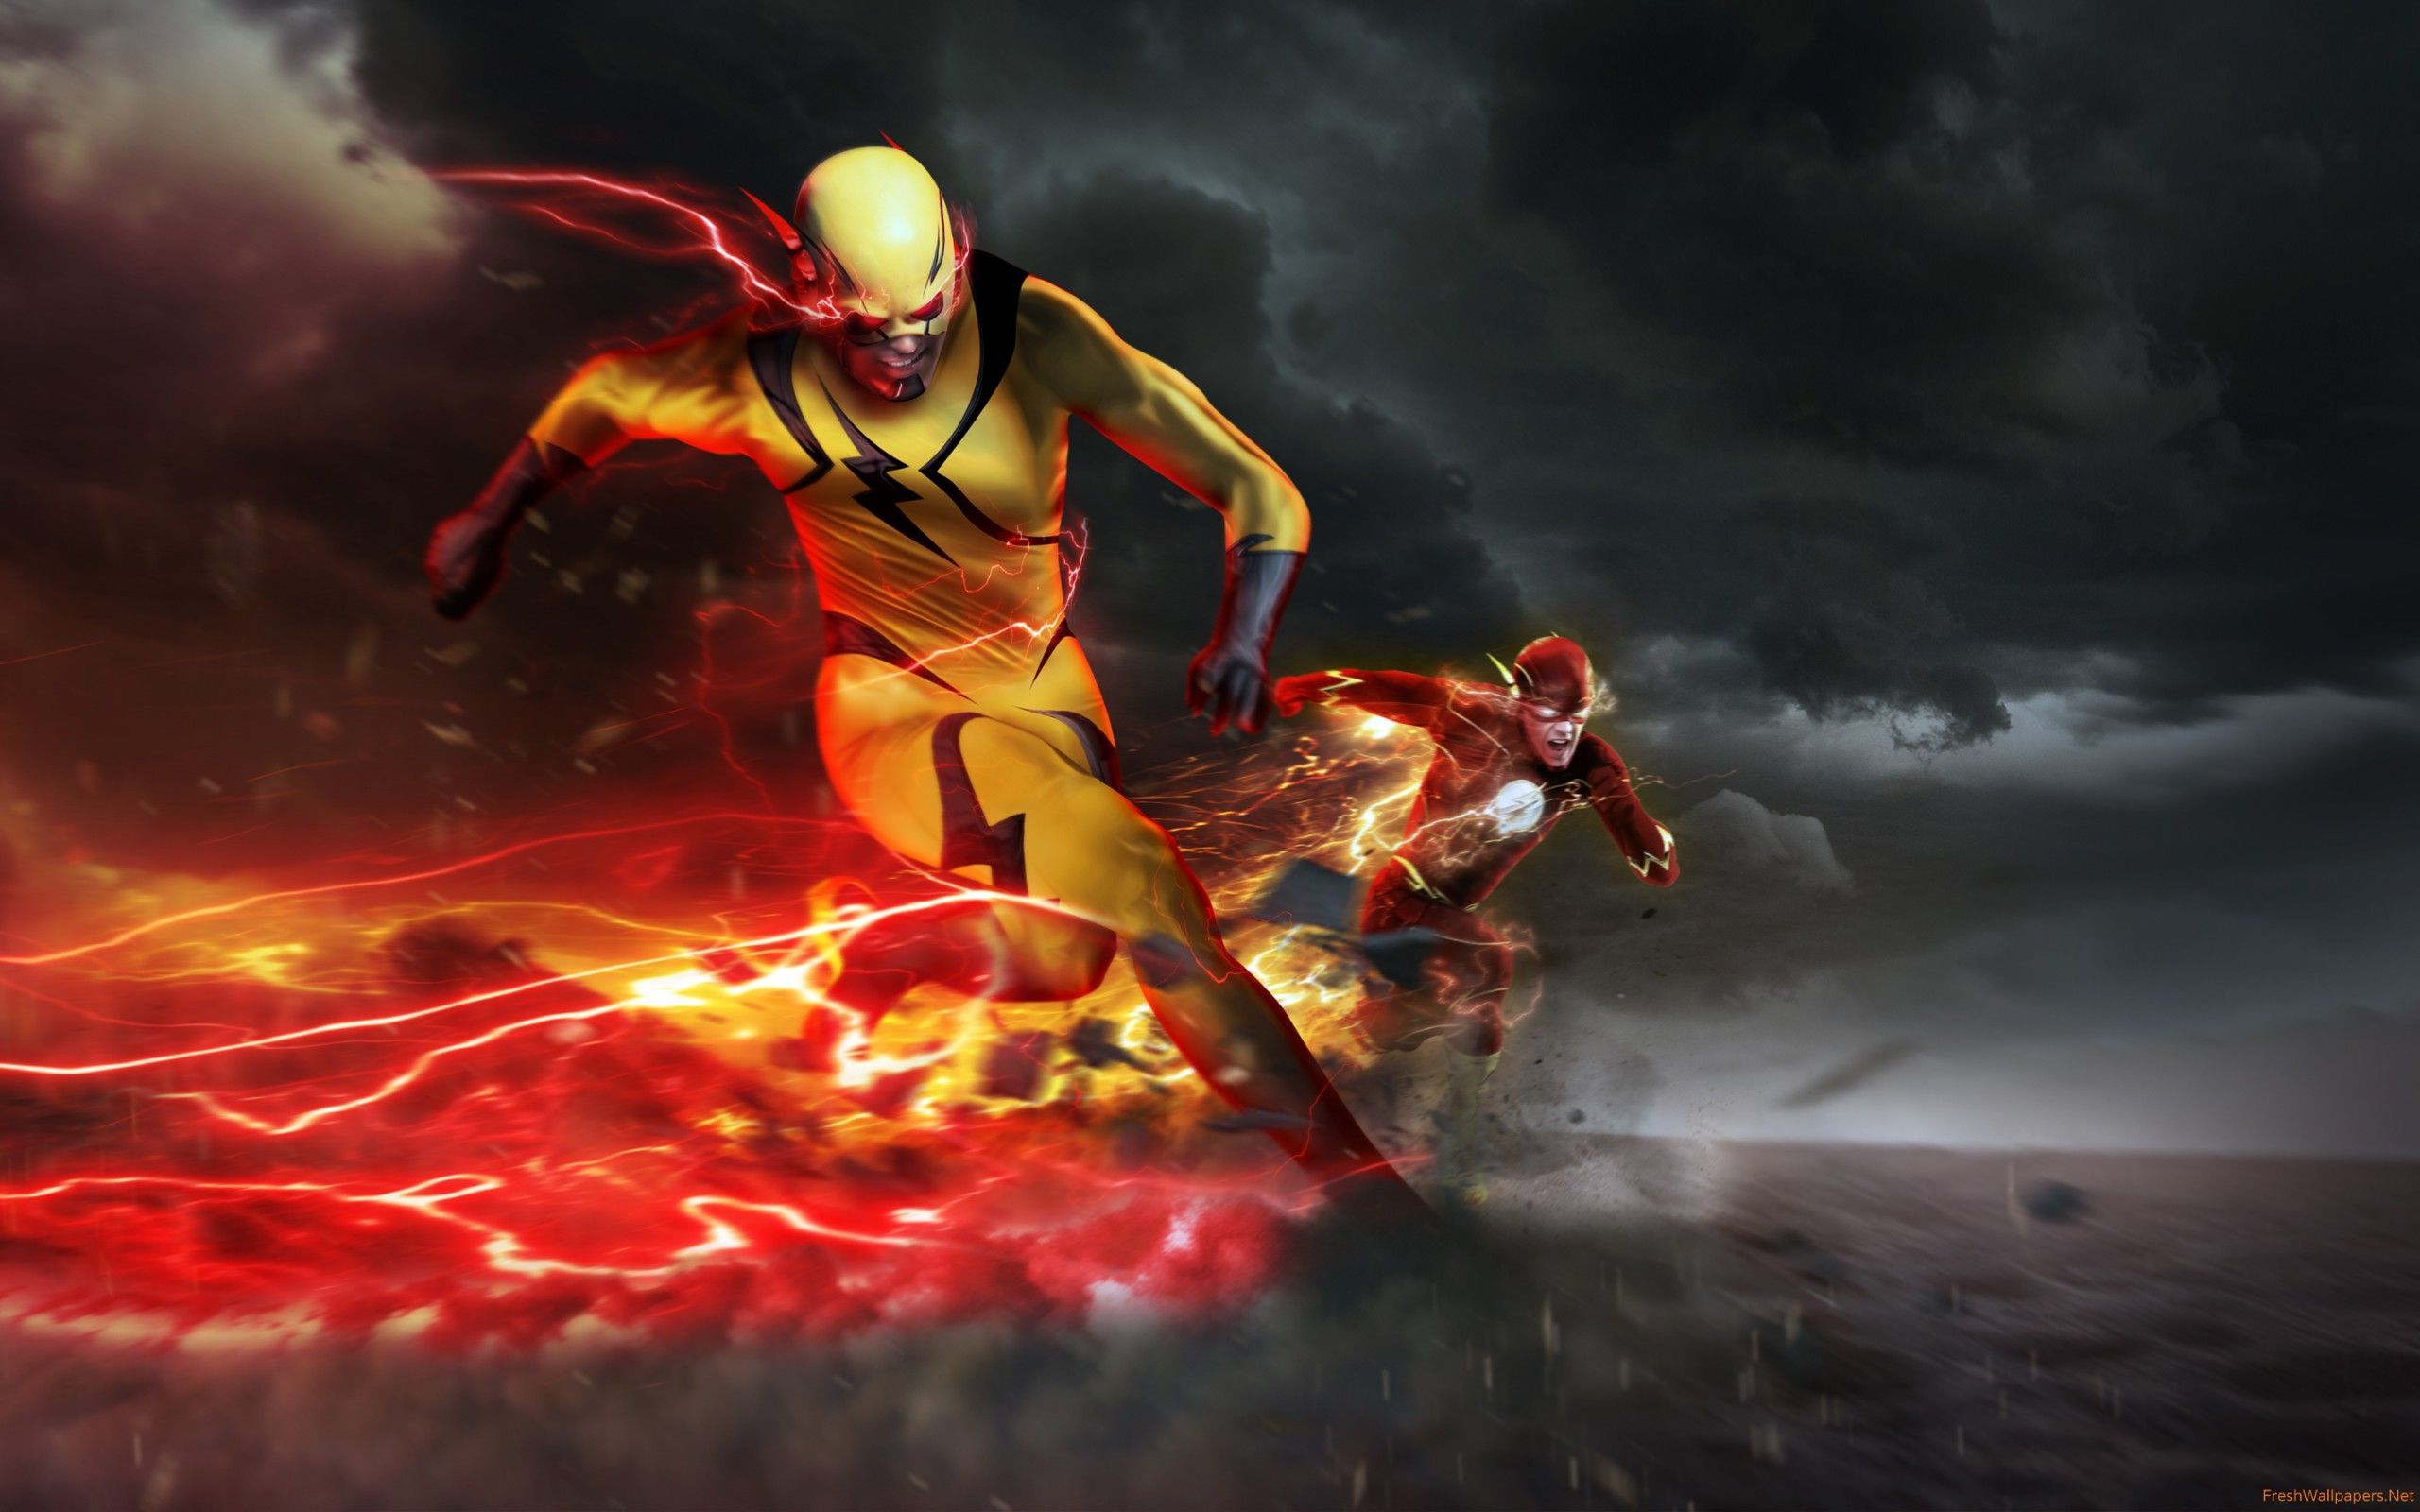 Eobard Thawne as Professor Zoom in The Flash wallpapers ...